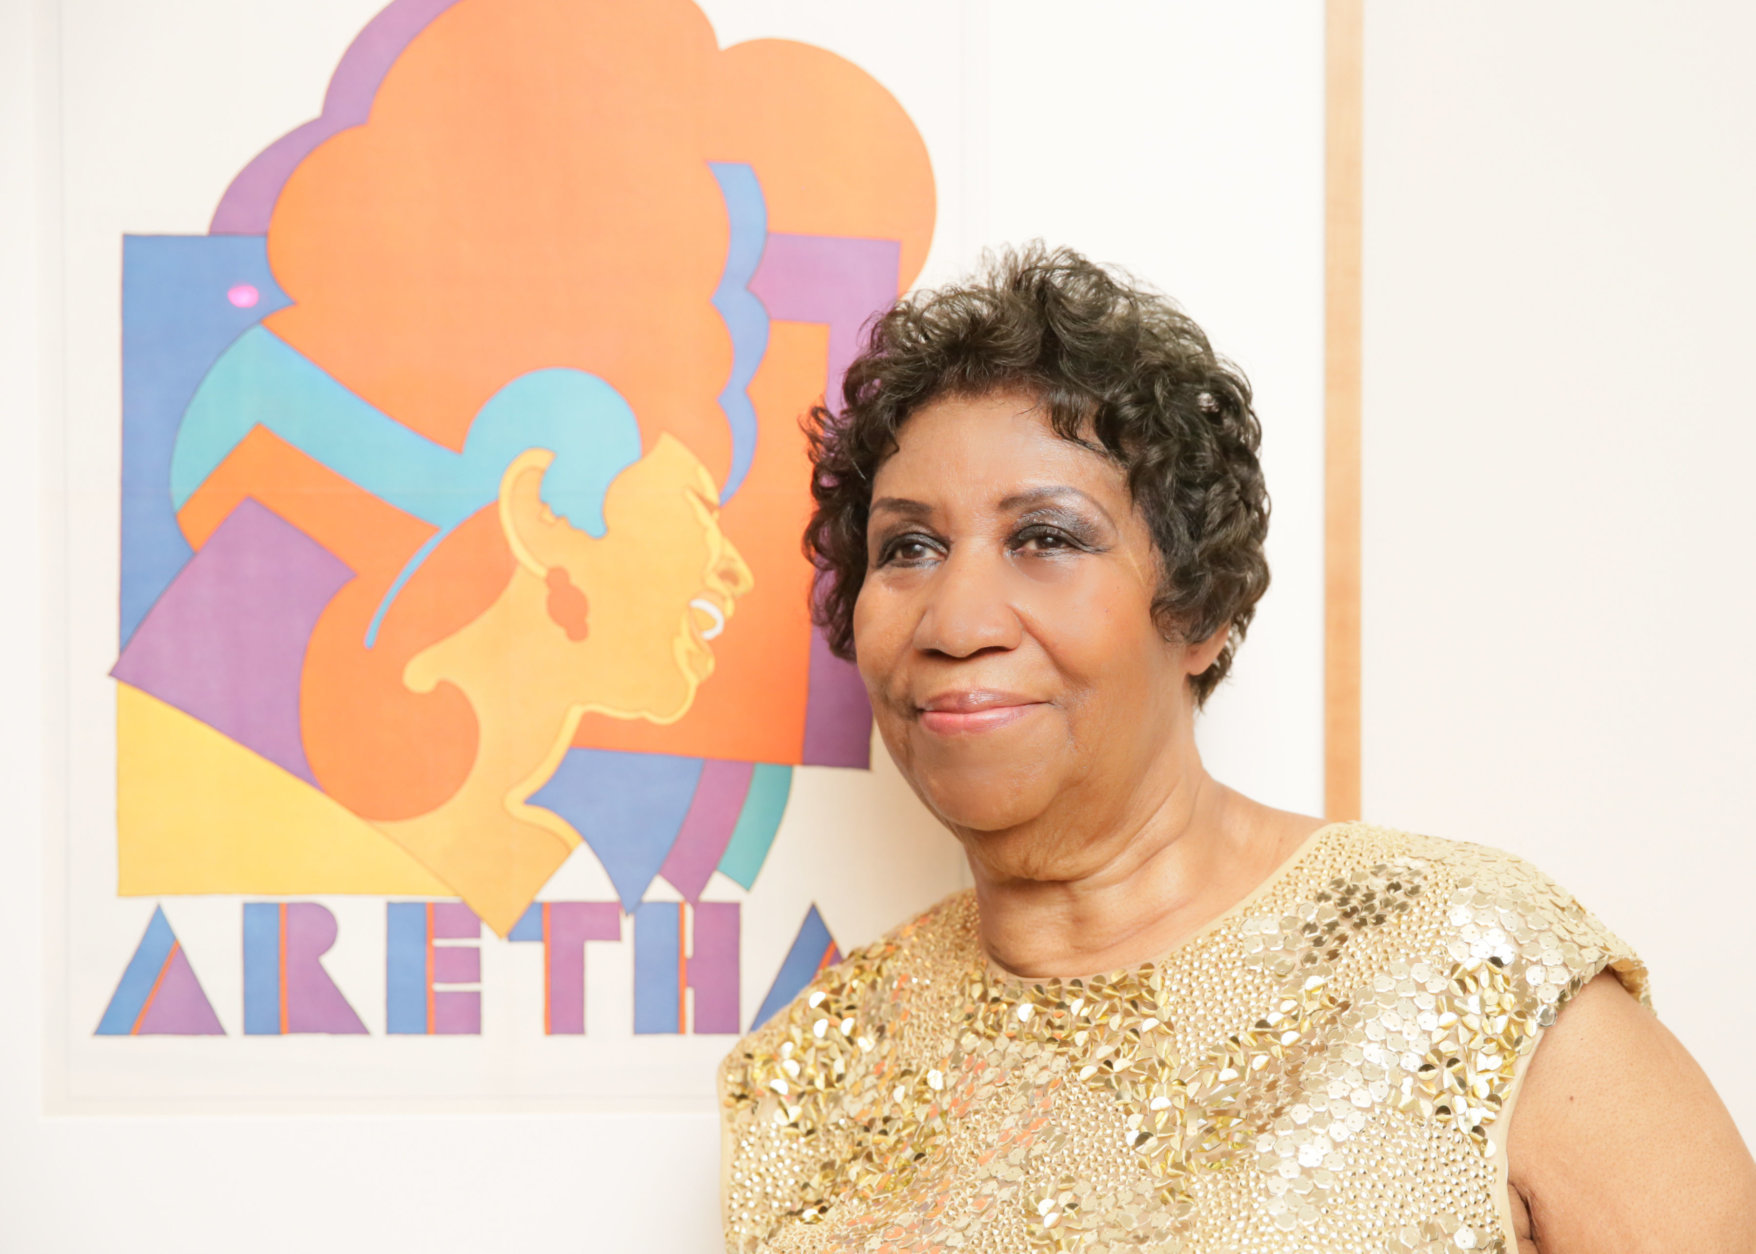 Aretha Franklin  with  her  Portrait at the  American Portrait Gala in 2015. (Courtesy  of  Angela  Pham  BFA)